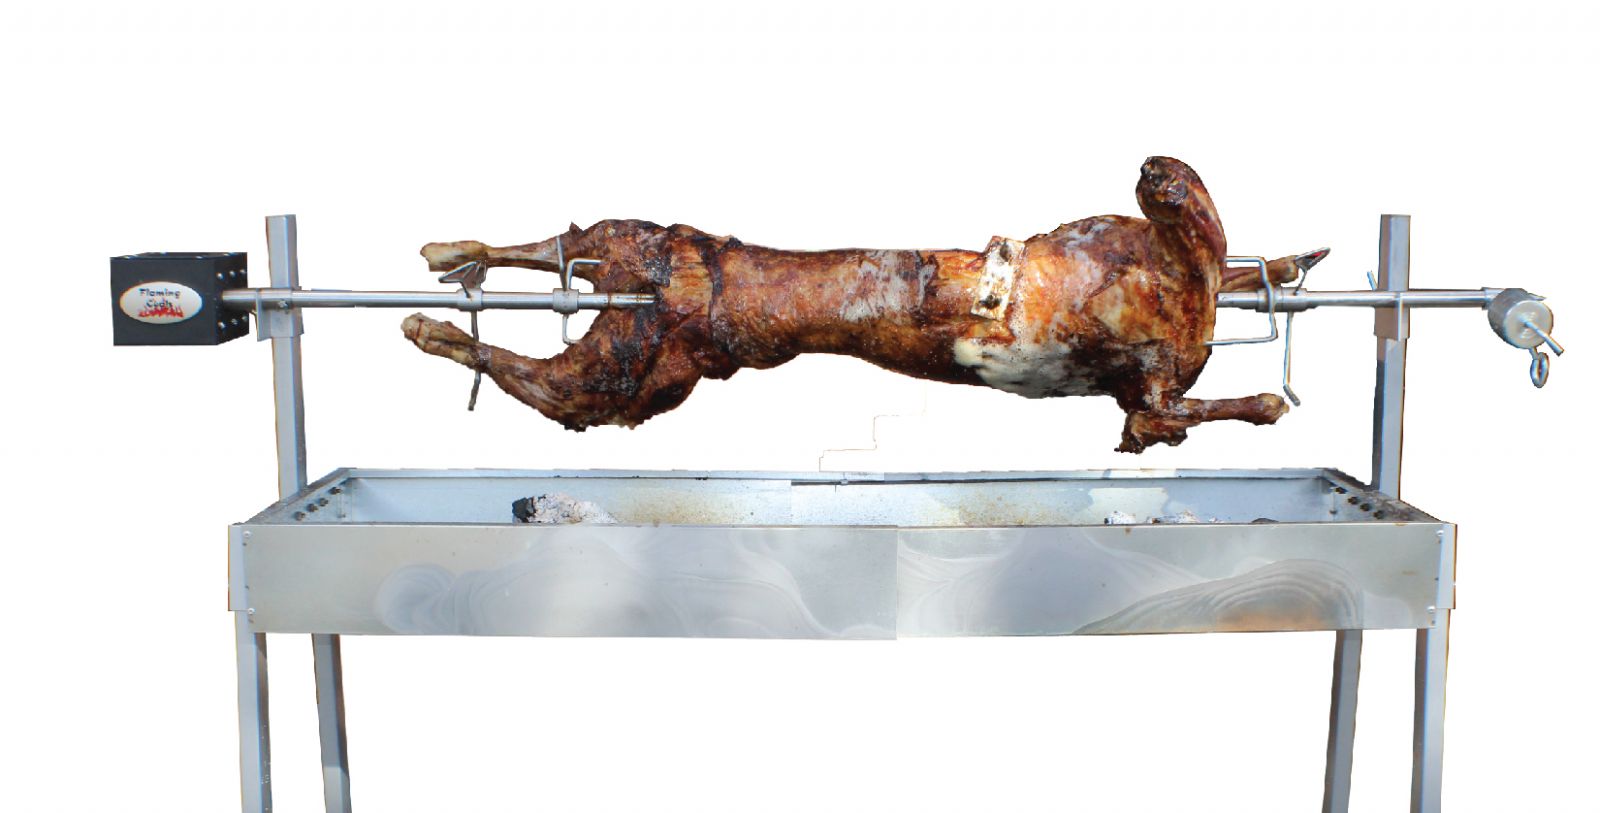 This picture shows a whole lamb mounted and balanced correctly on a spit roaster